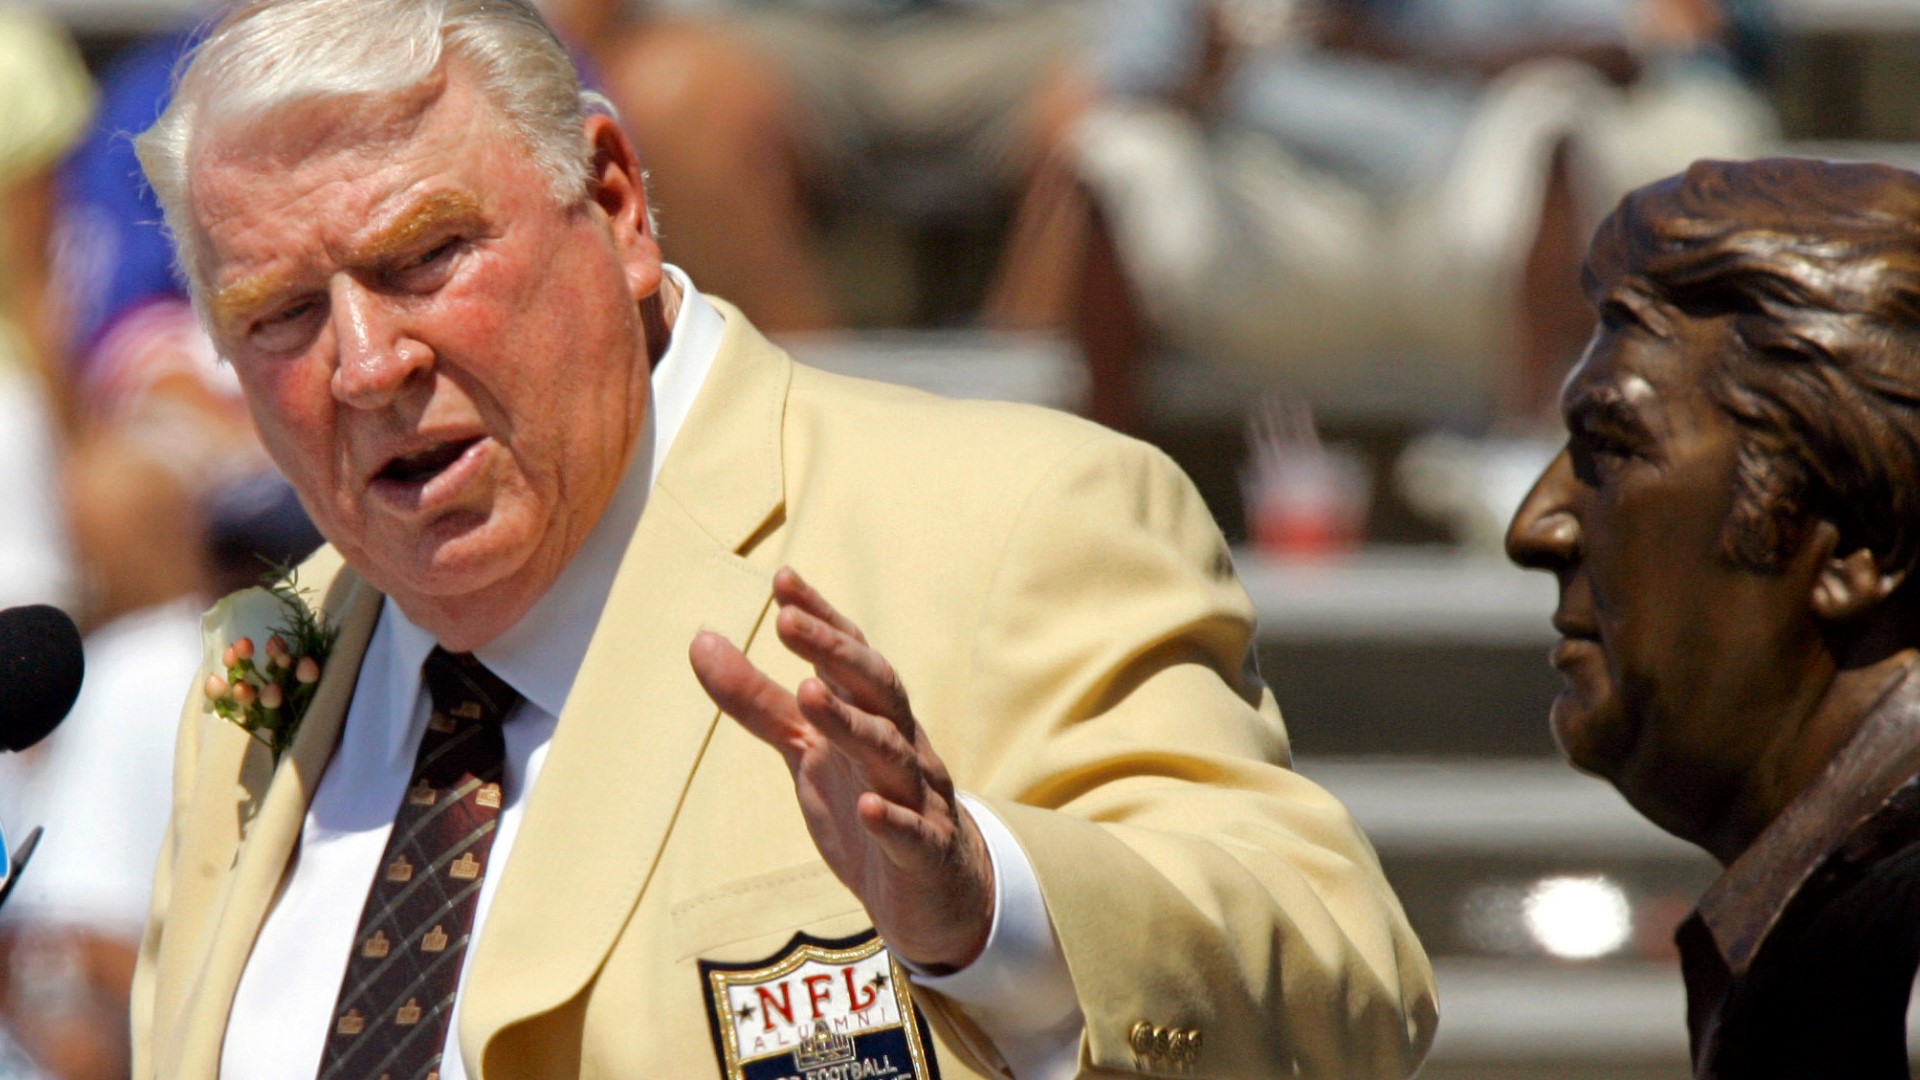 According to the NFL Commissioner, Madden died at the age of 85 on Tuesday.